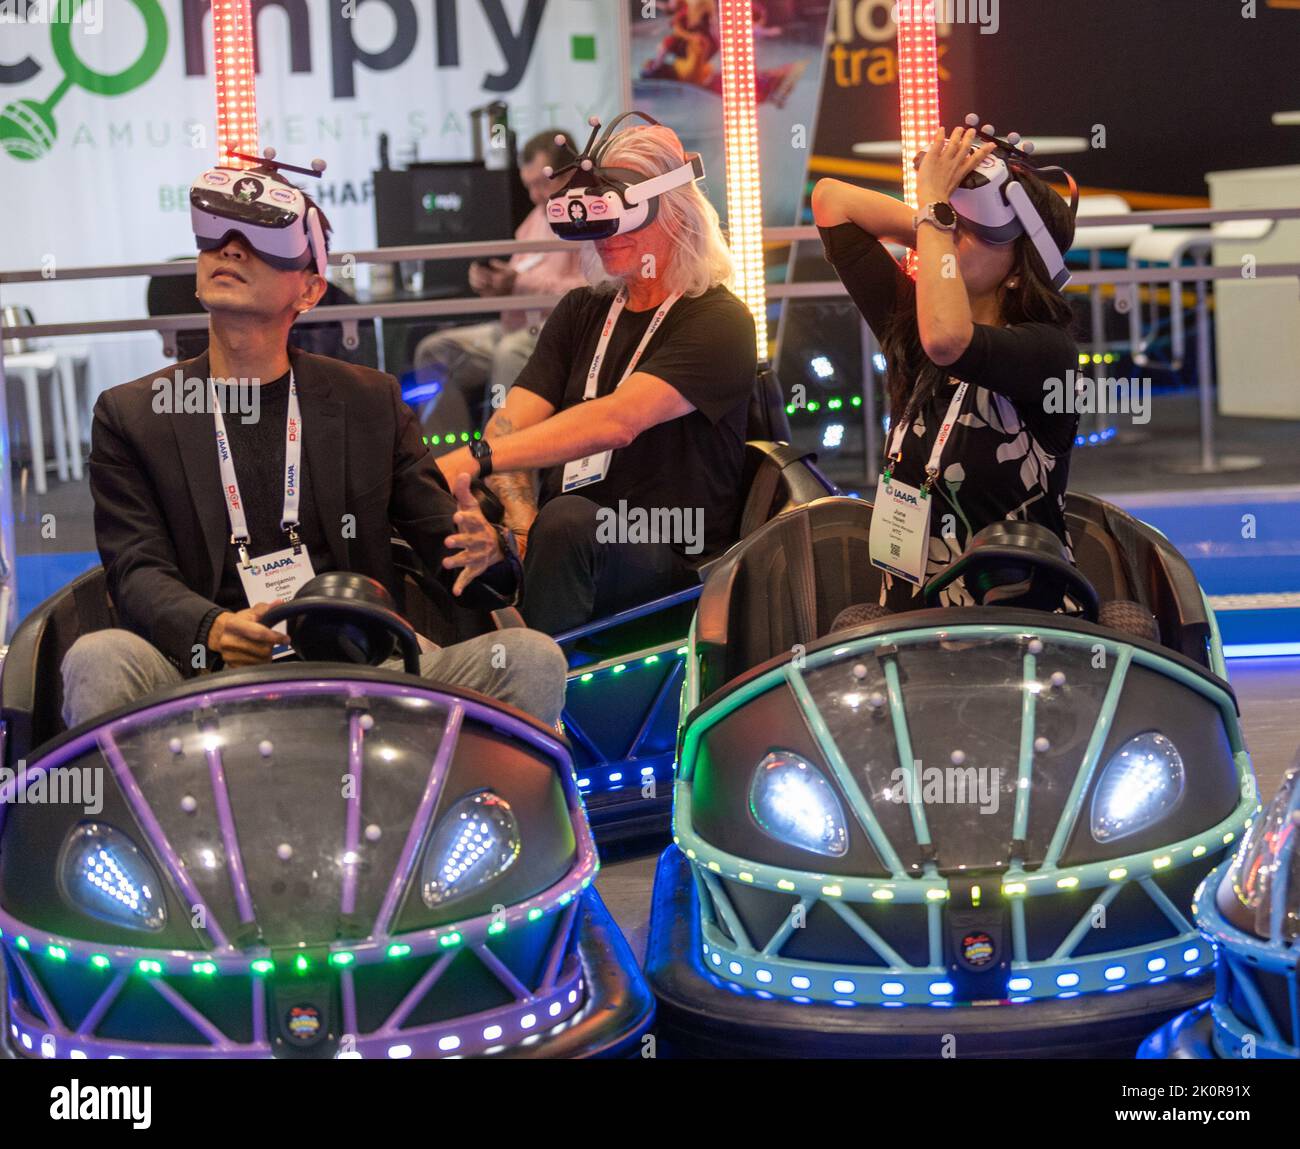 London, UK. 13th Sep, 2022. IAAPA Expo Europe (Global Association for the Attractions Industry) Excel London vr dodgem bumper cars Credit: Ian Davidson/Alamy Live News Stock Photo